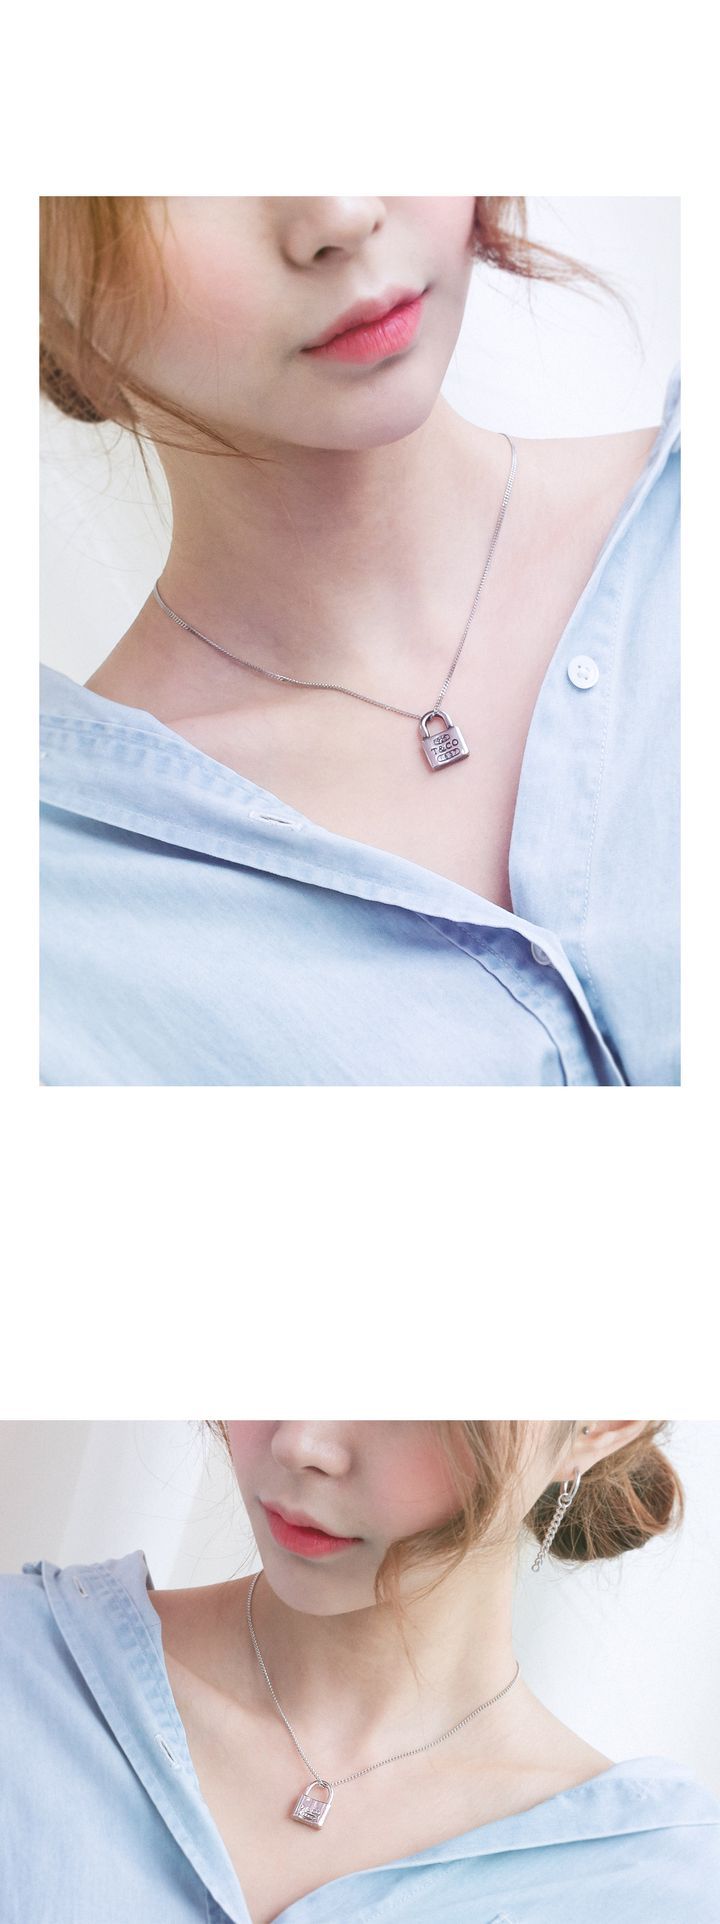 YESASIA: BTS: J-Hope Style - Cleave Necklace (Surgical Steel / 45cm)  GROUPS,Celebrity Gifts,MALE STARS,GIFTS,Accessories,PHOTO/POSTER - BTS,  Asmama - Korean Collectibles - Free Shipping